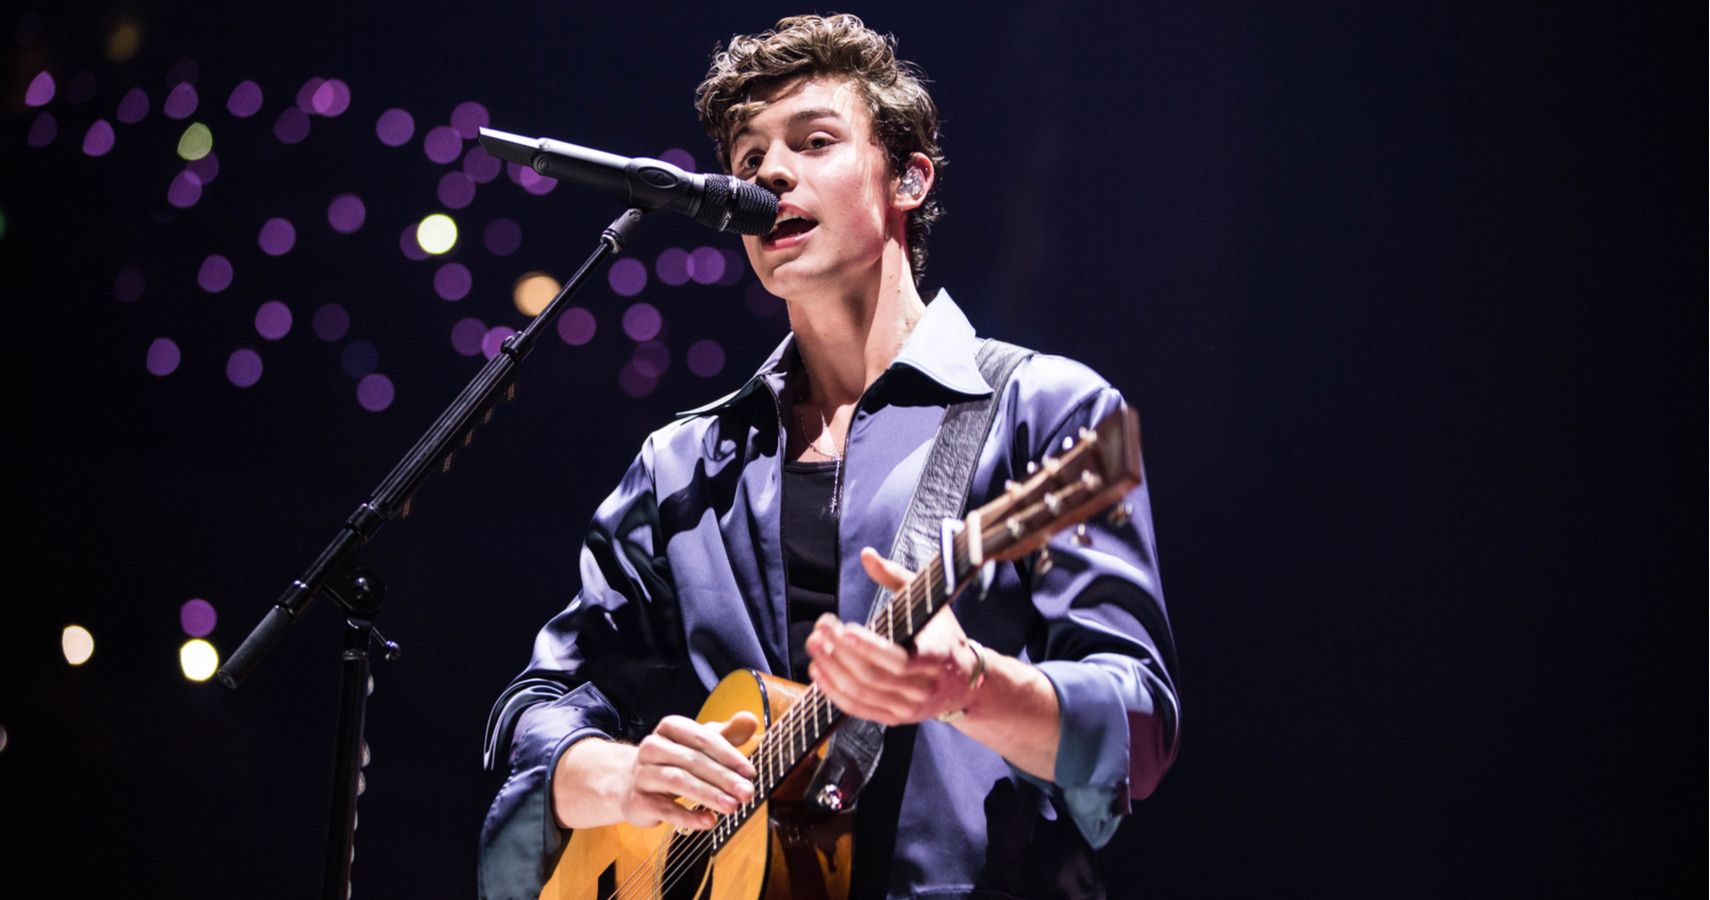 Shawn Mendes Performing At A Concert